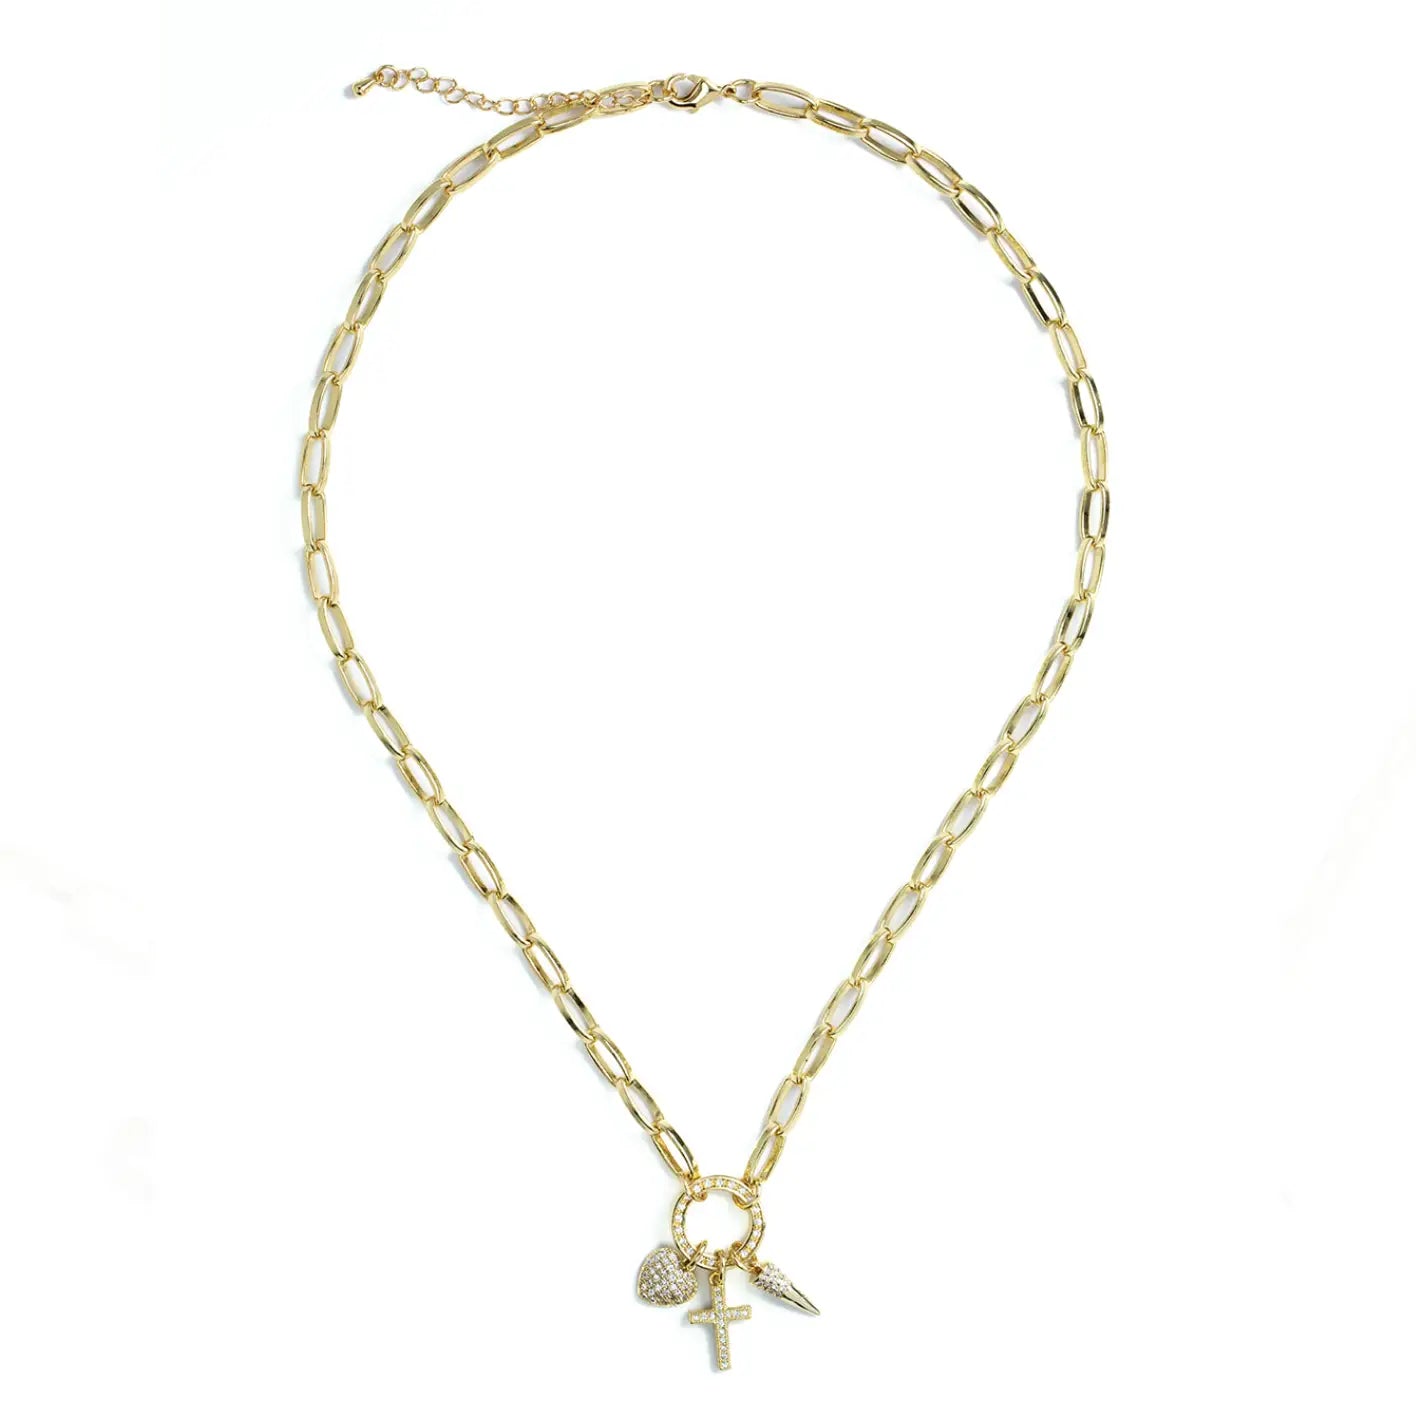 Cross + Heart + Point Statement Necklace - Gold